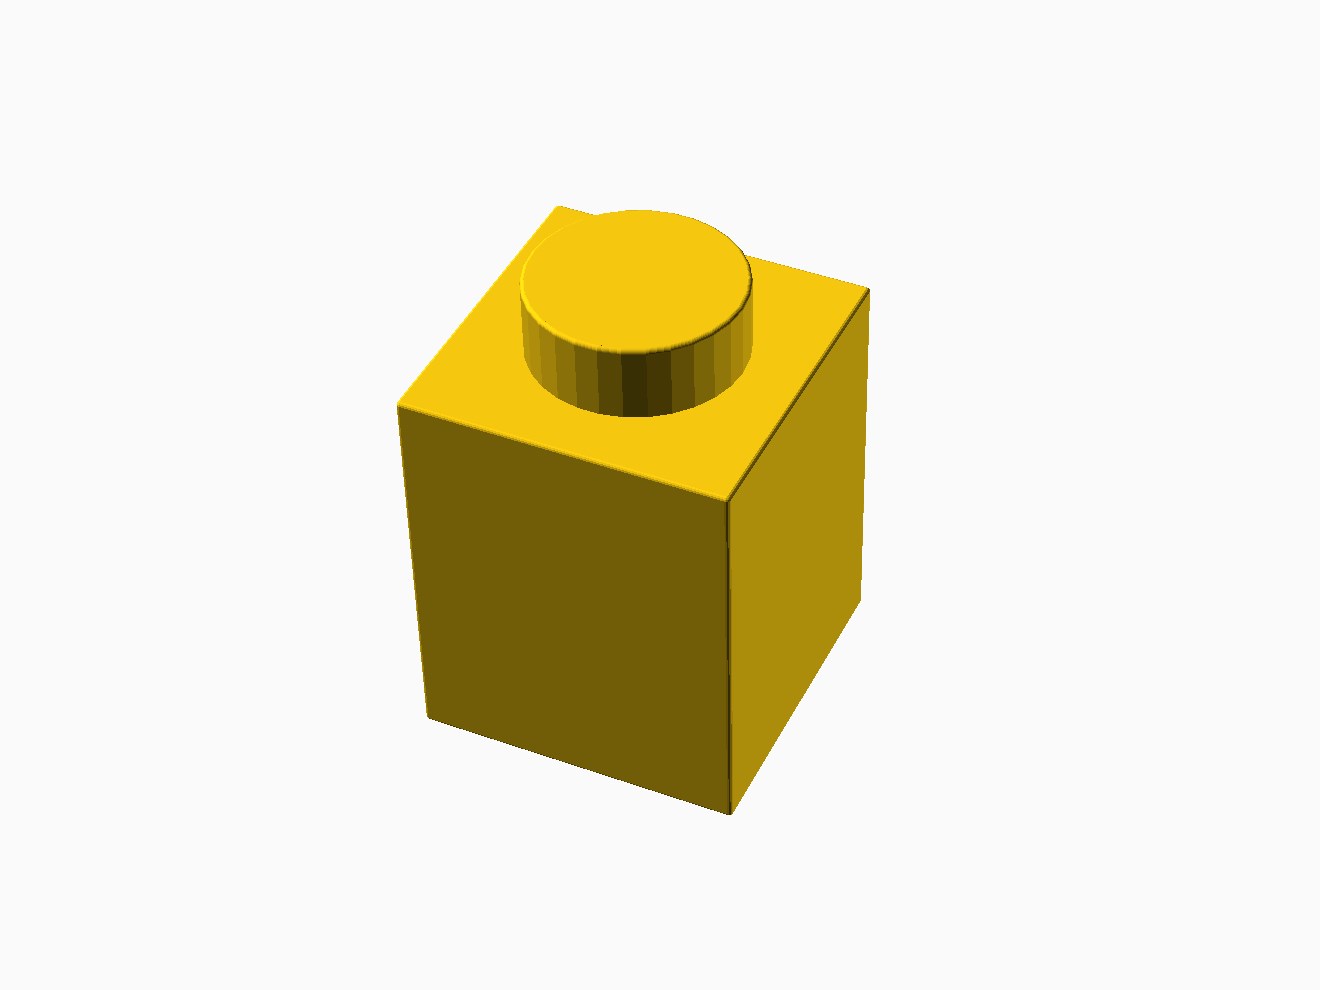 3D printable model of a LEGO 1x1 Brick with standard knobs.